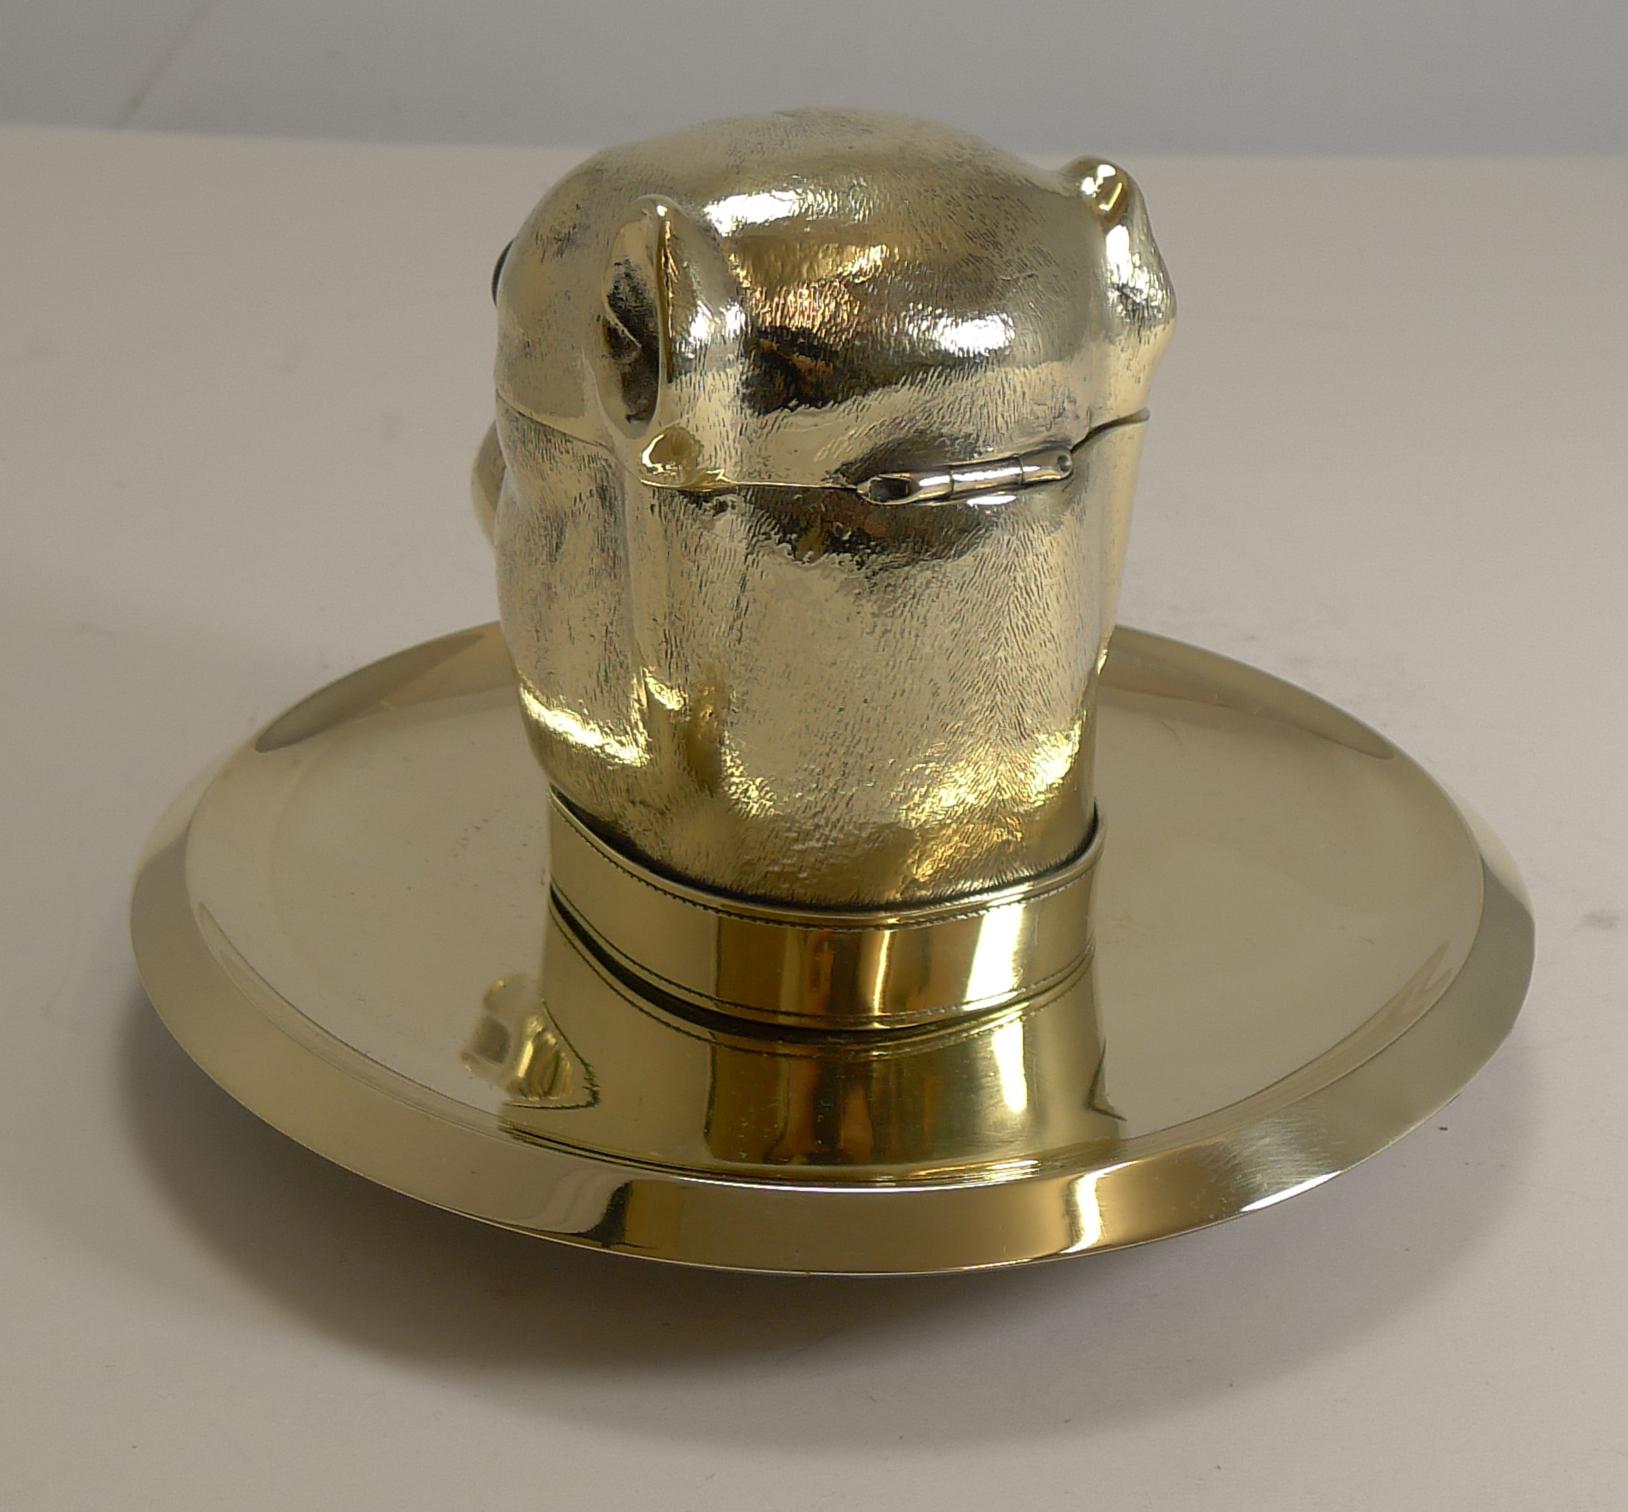 Grand English Bulldog Novelty Inkwell with Glass Eyes, circa 1880 For Sale 2